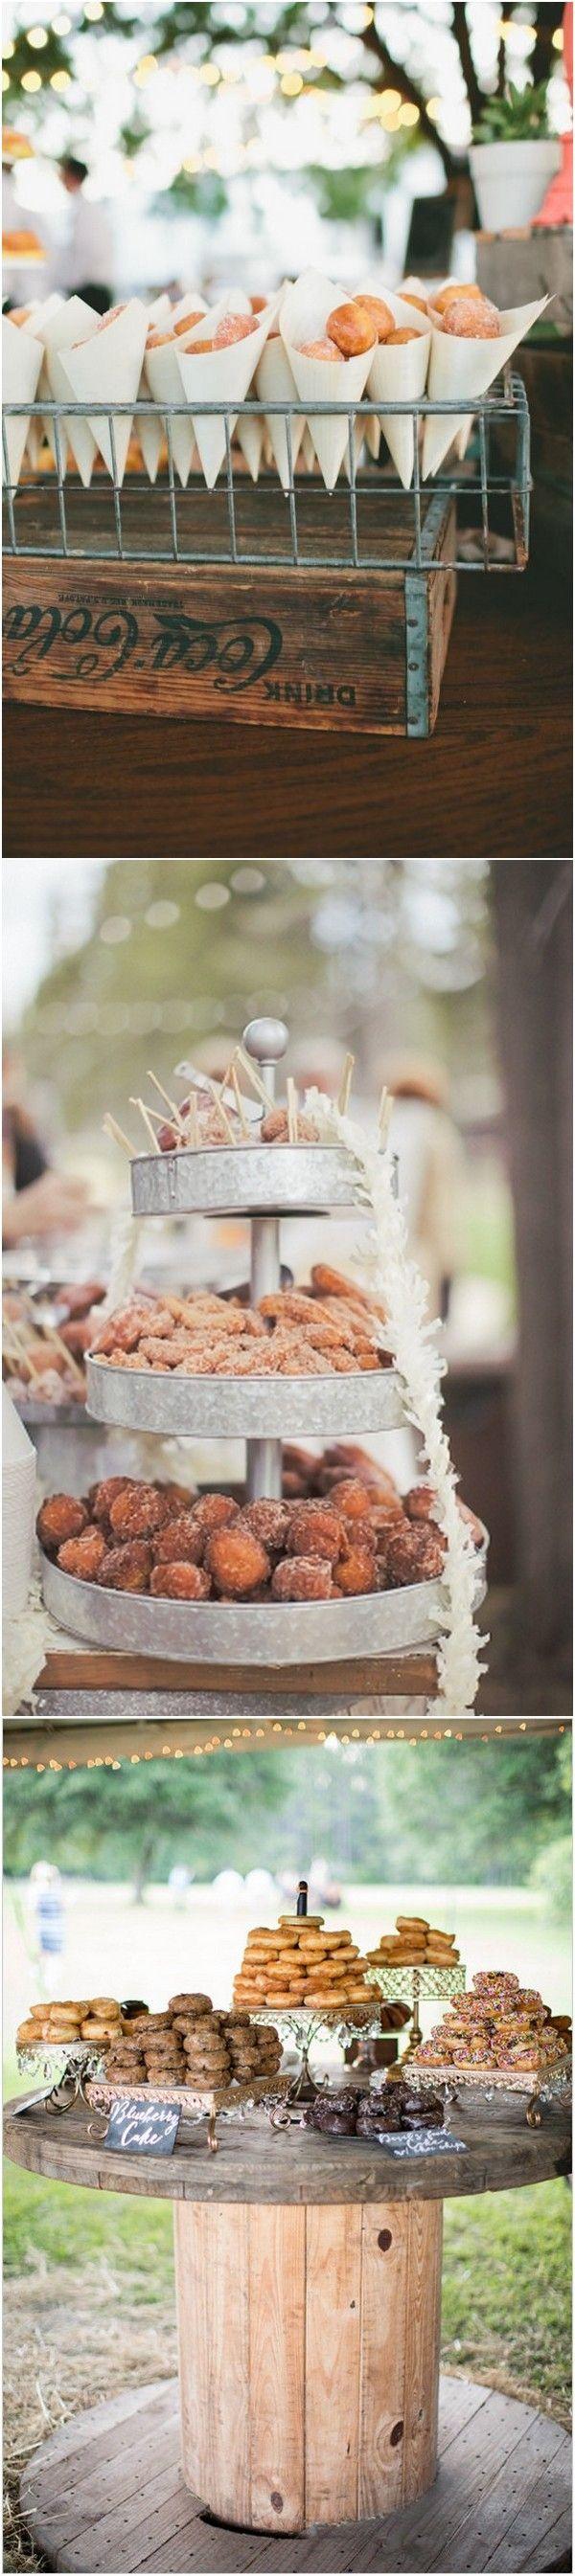 Wedding - Trending-20 Perfect Wedding Donuts Display Ideas - Page 4 Of 4